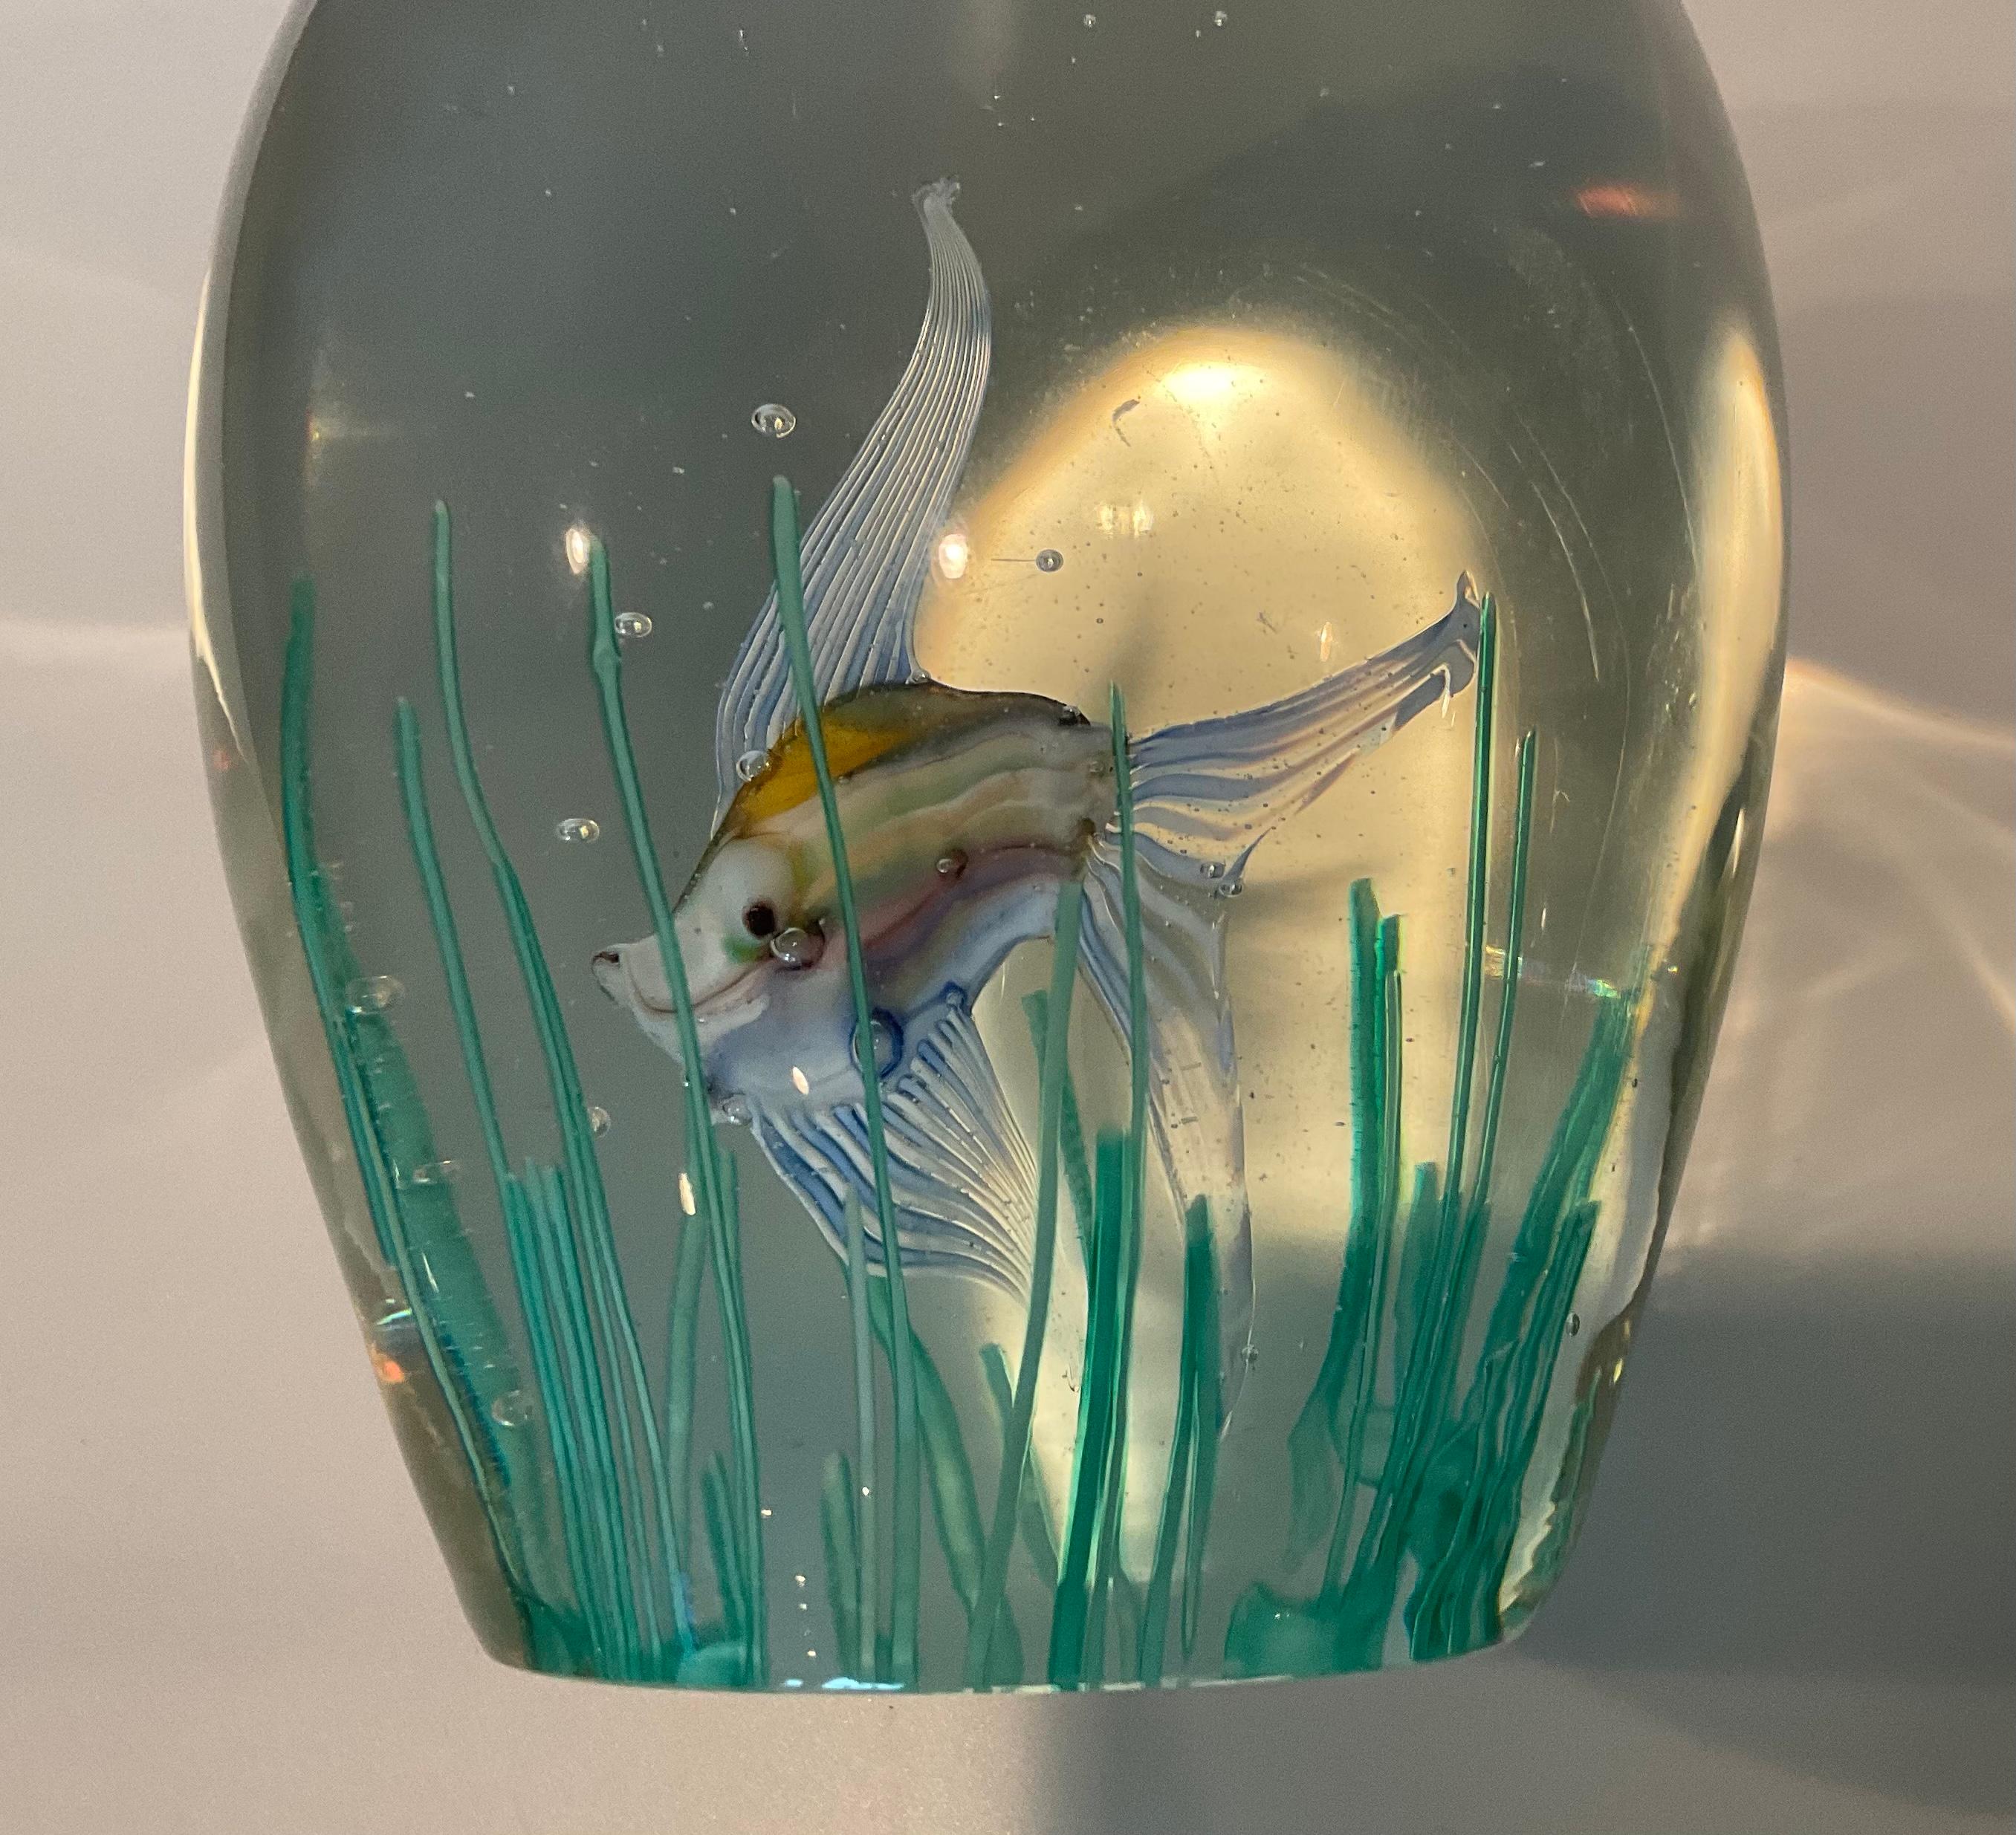 PAIR Murano art glass Barbini Aquarium paperweight sculptures with fish and seaweed encased in the solid glass sculpture. The shorter bookend is 6.25 inches tall and 5 inches wide.